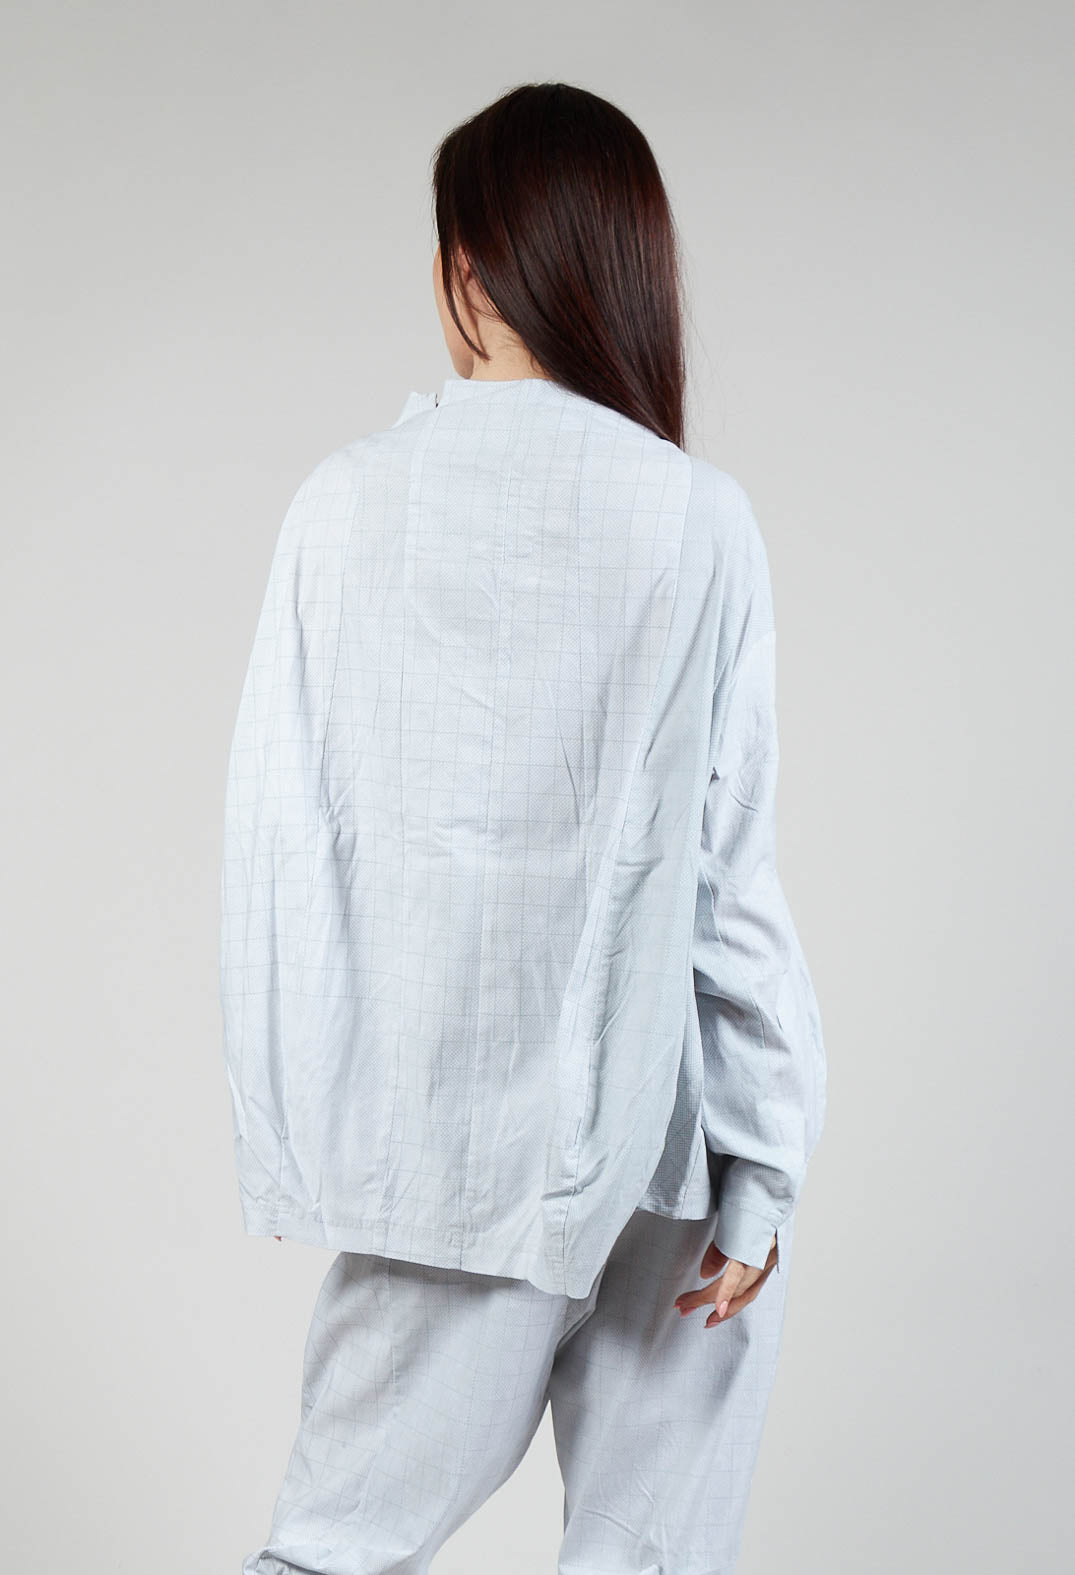 Relaxed Fit Jacket in Placed Grey Print